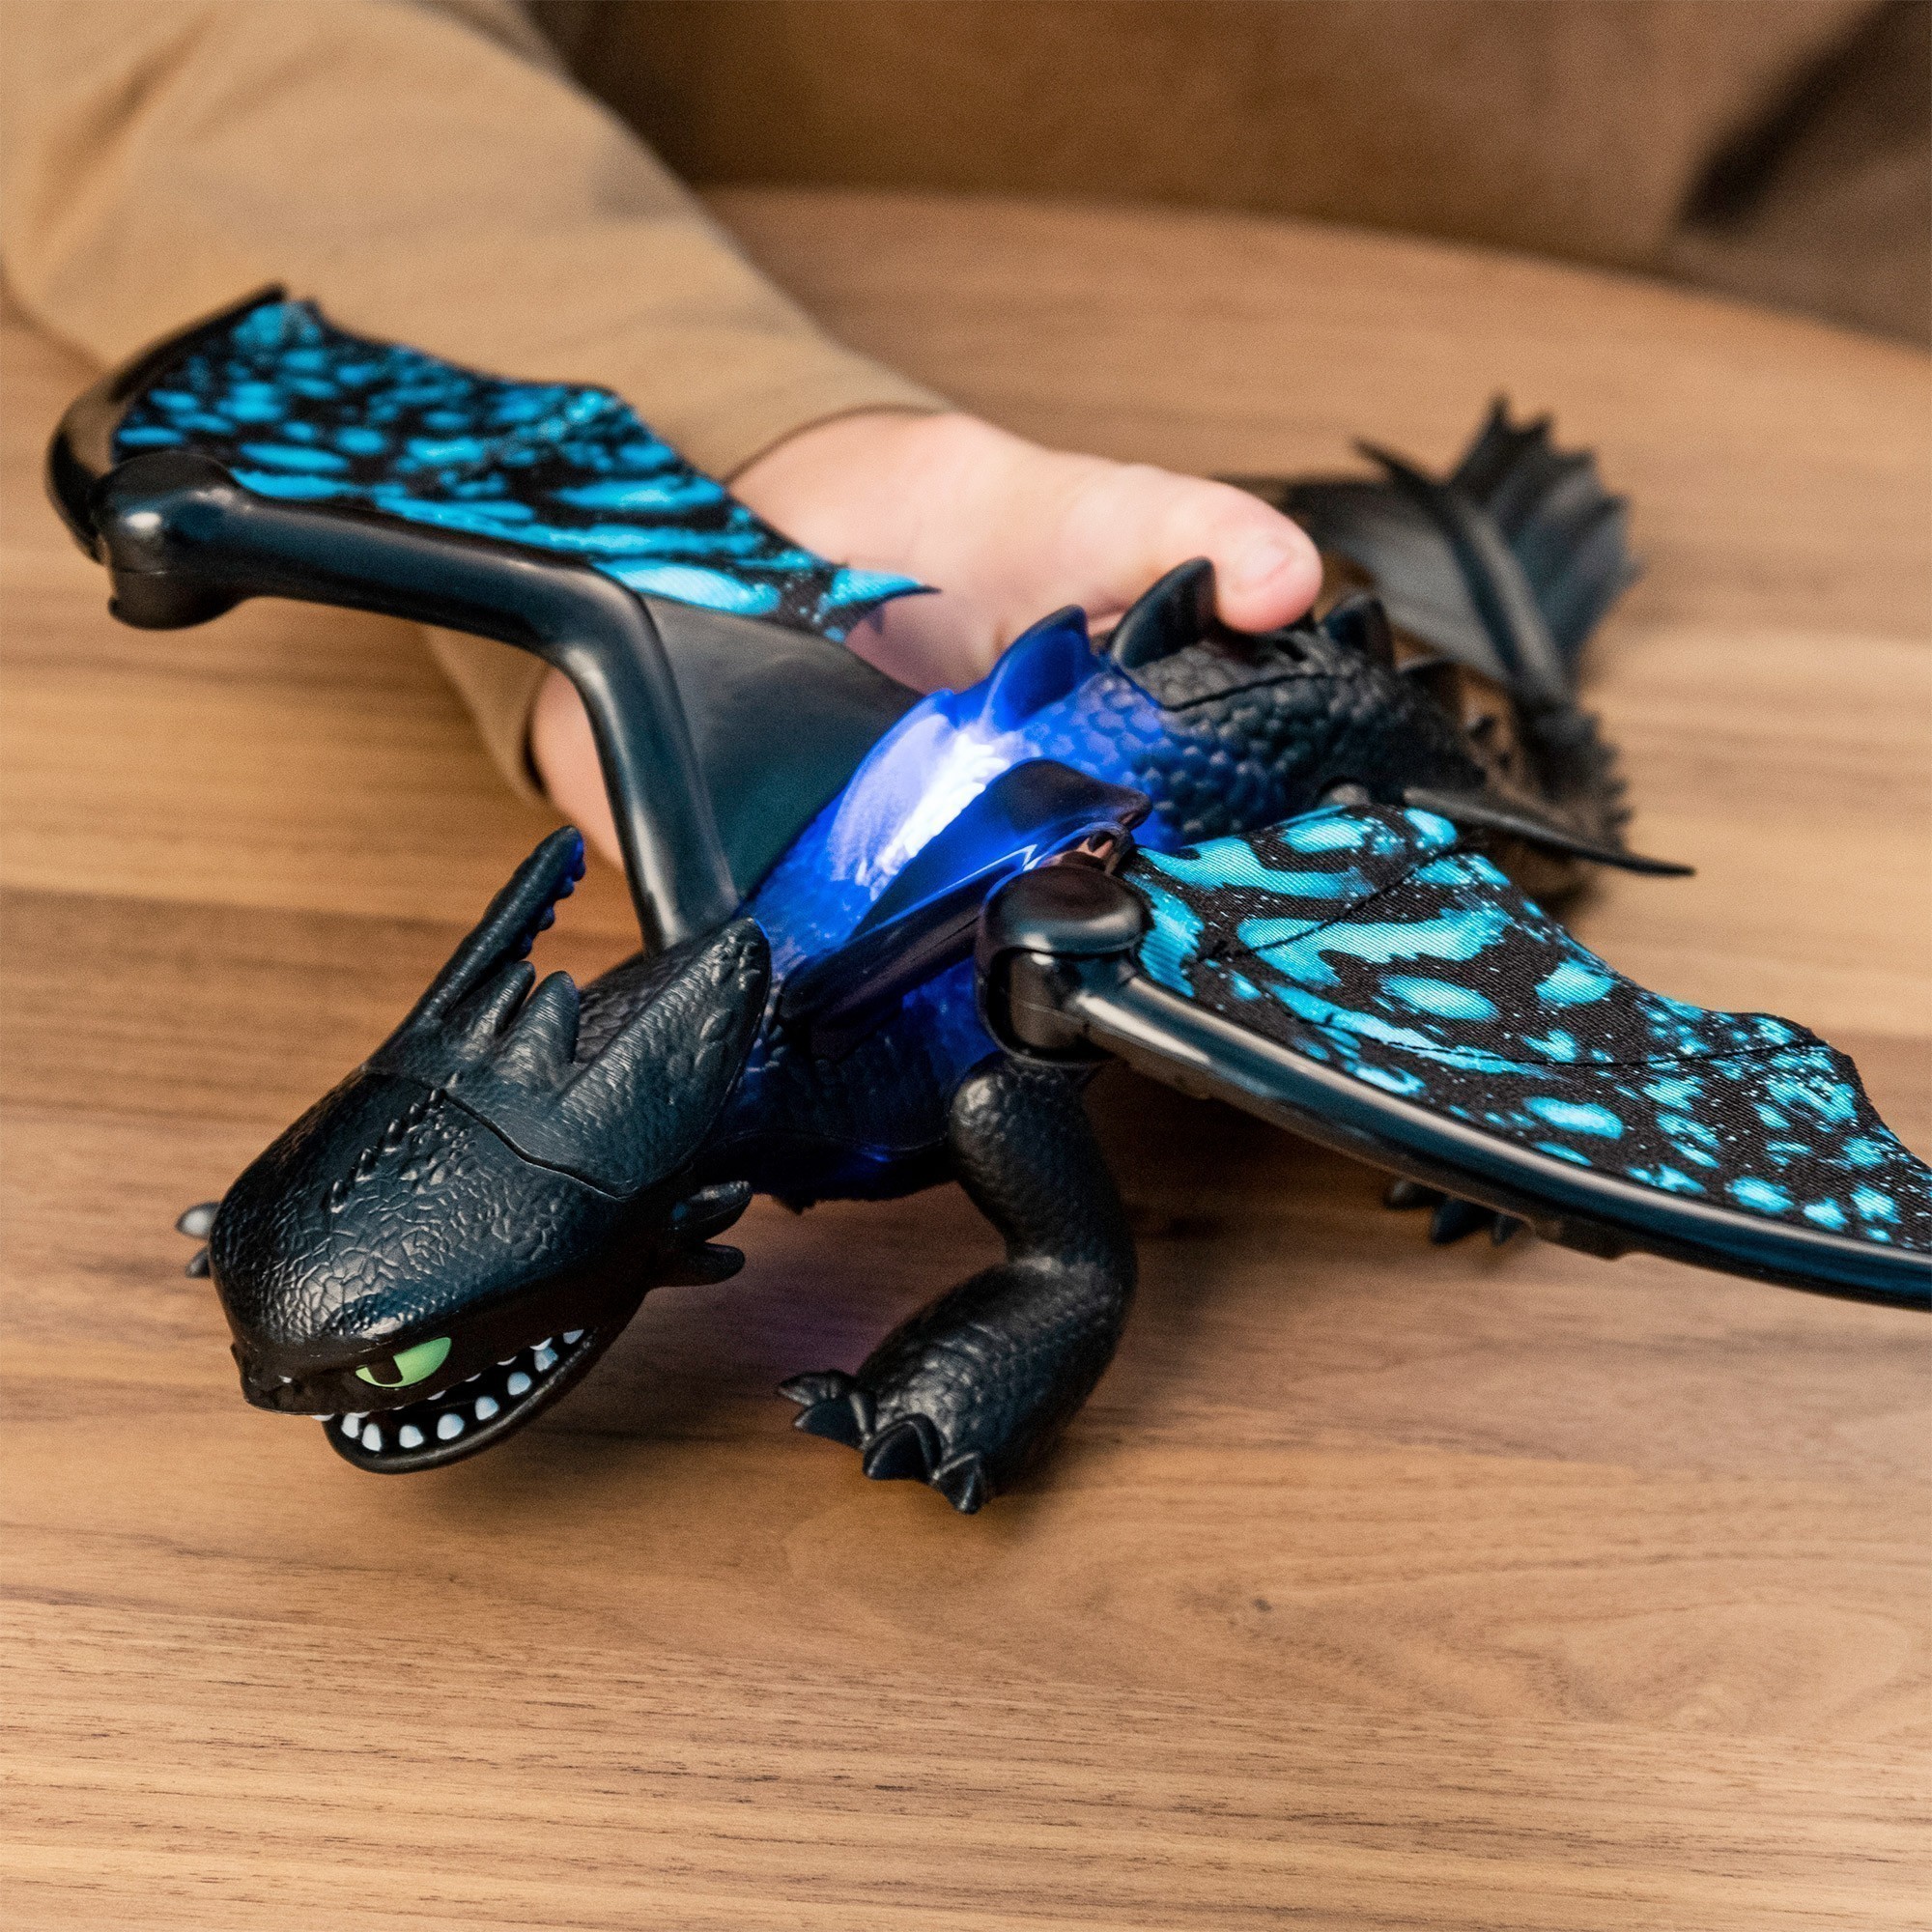 Dreamworks - How To Train Your Dragon 3 - Deluxe Toothless Dragon